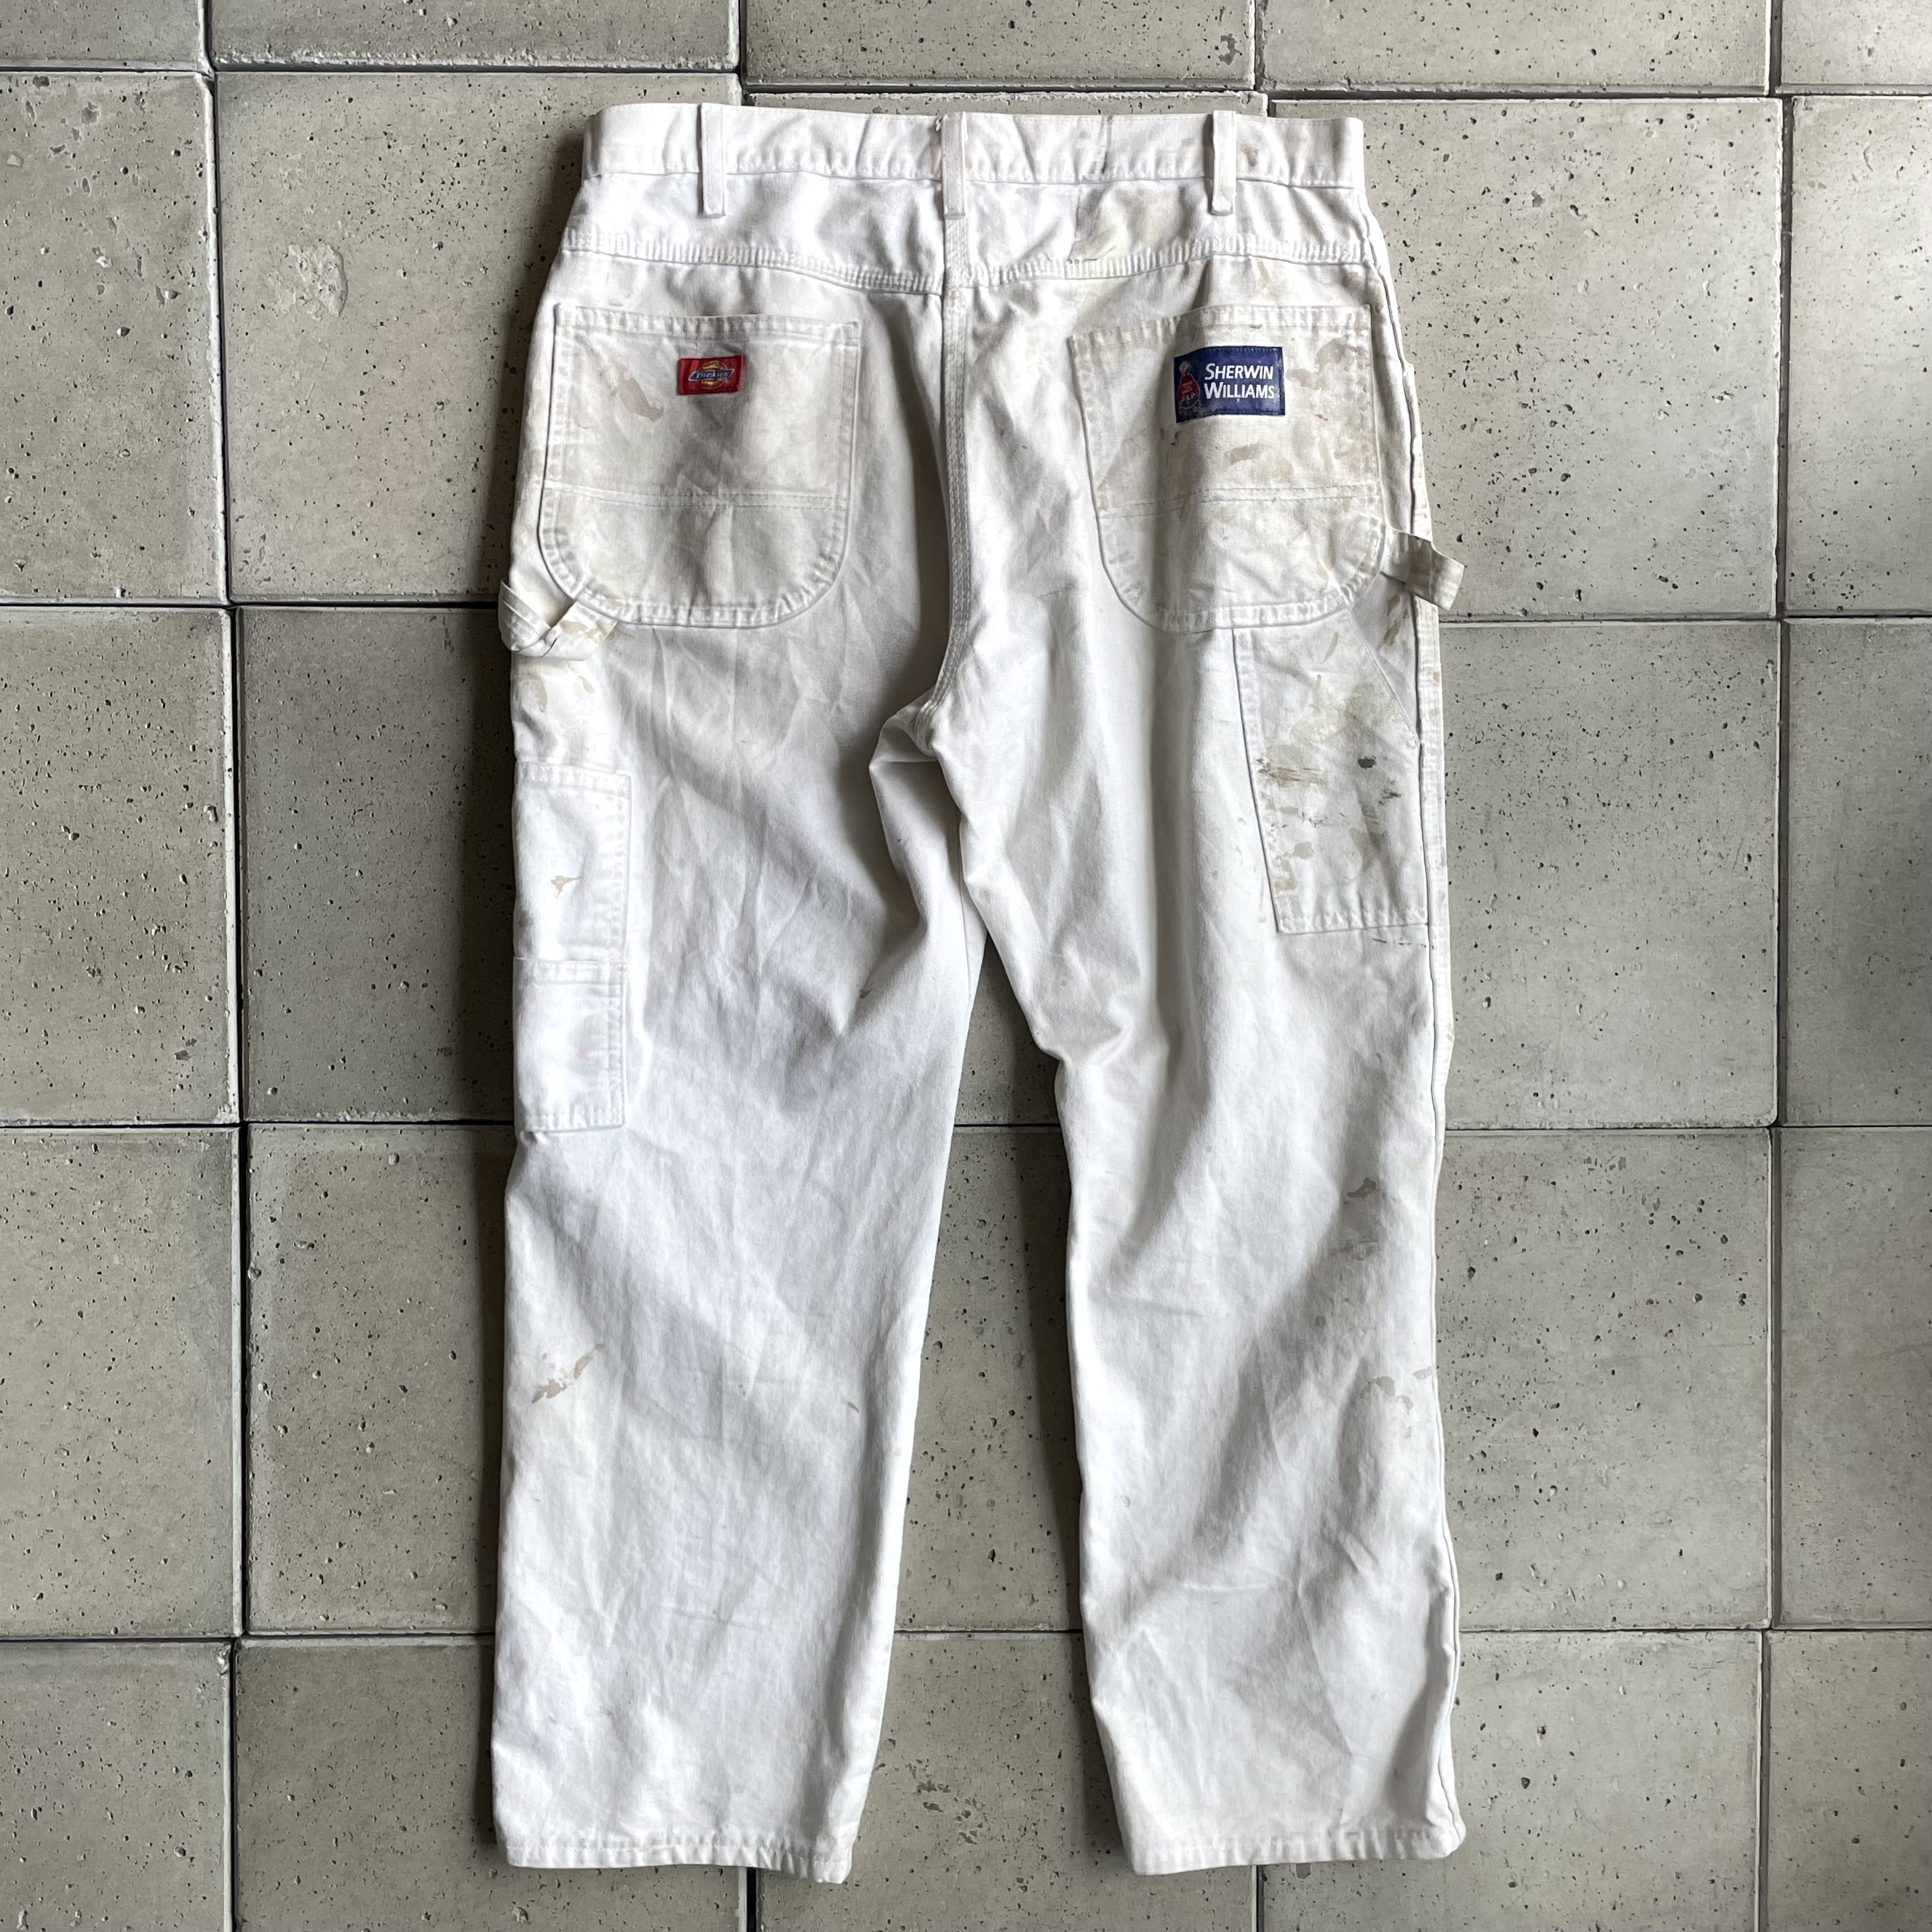 DICKIES SHERWIN WILLIAMS Painted Painter Pants 】size- 36 ...